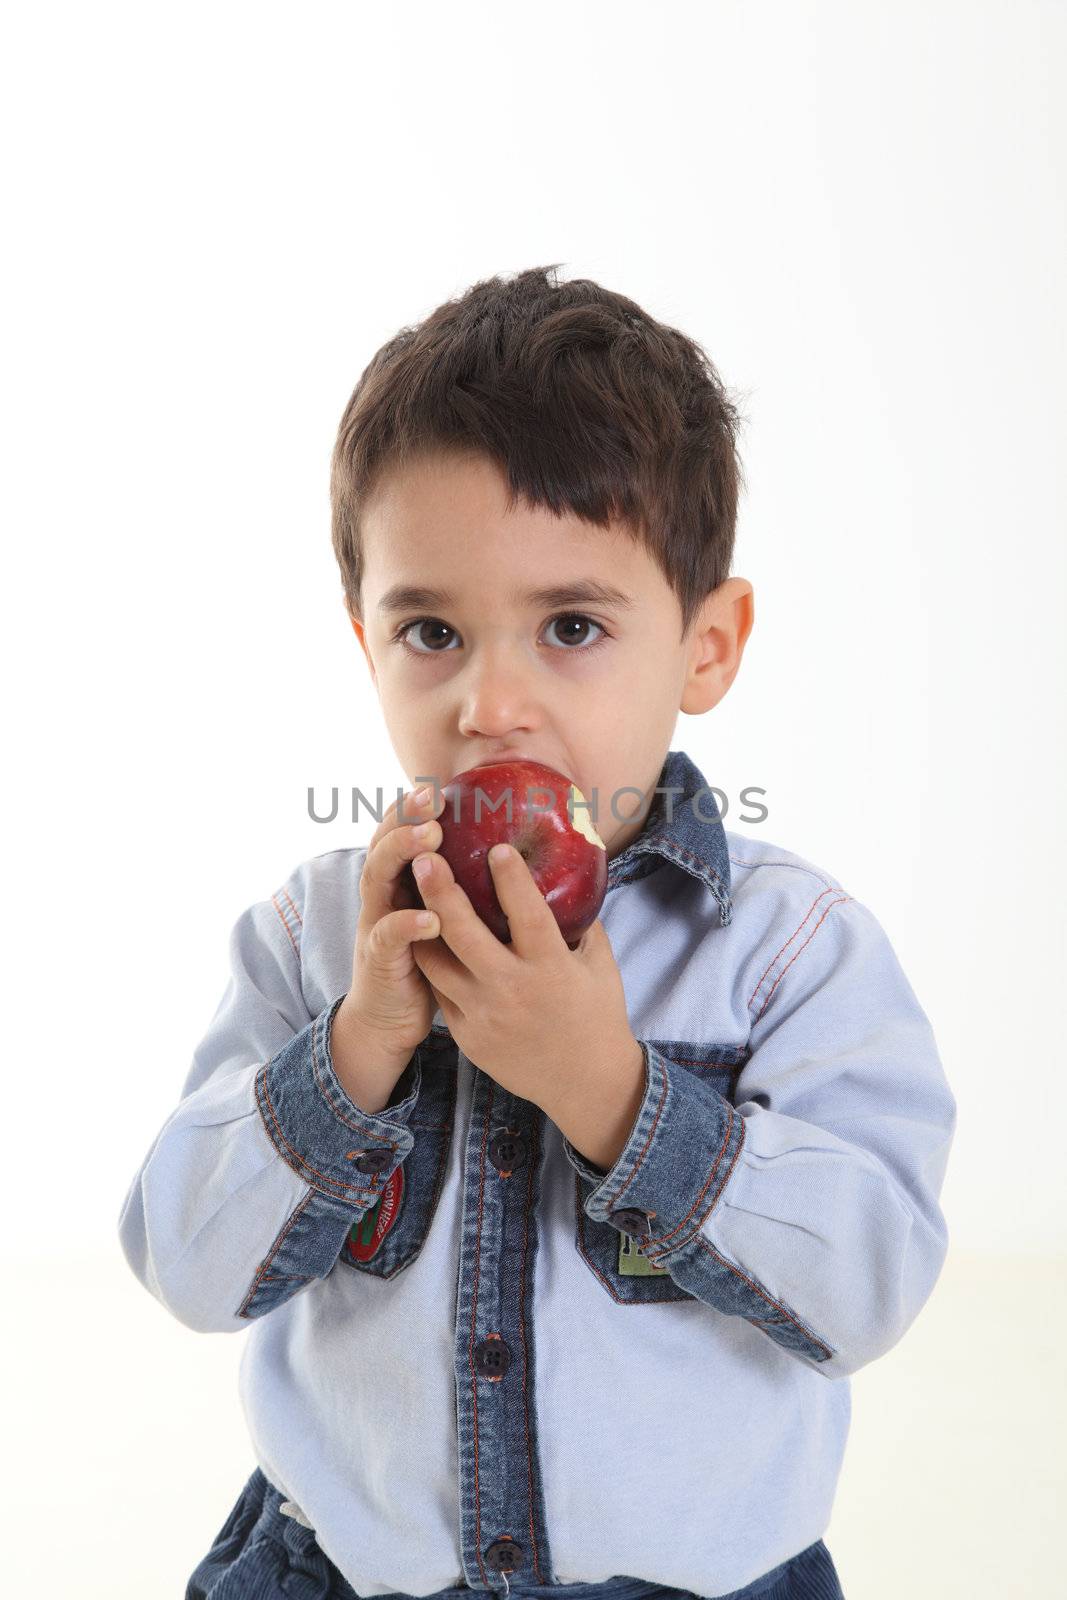 Child eating an apple on white background